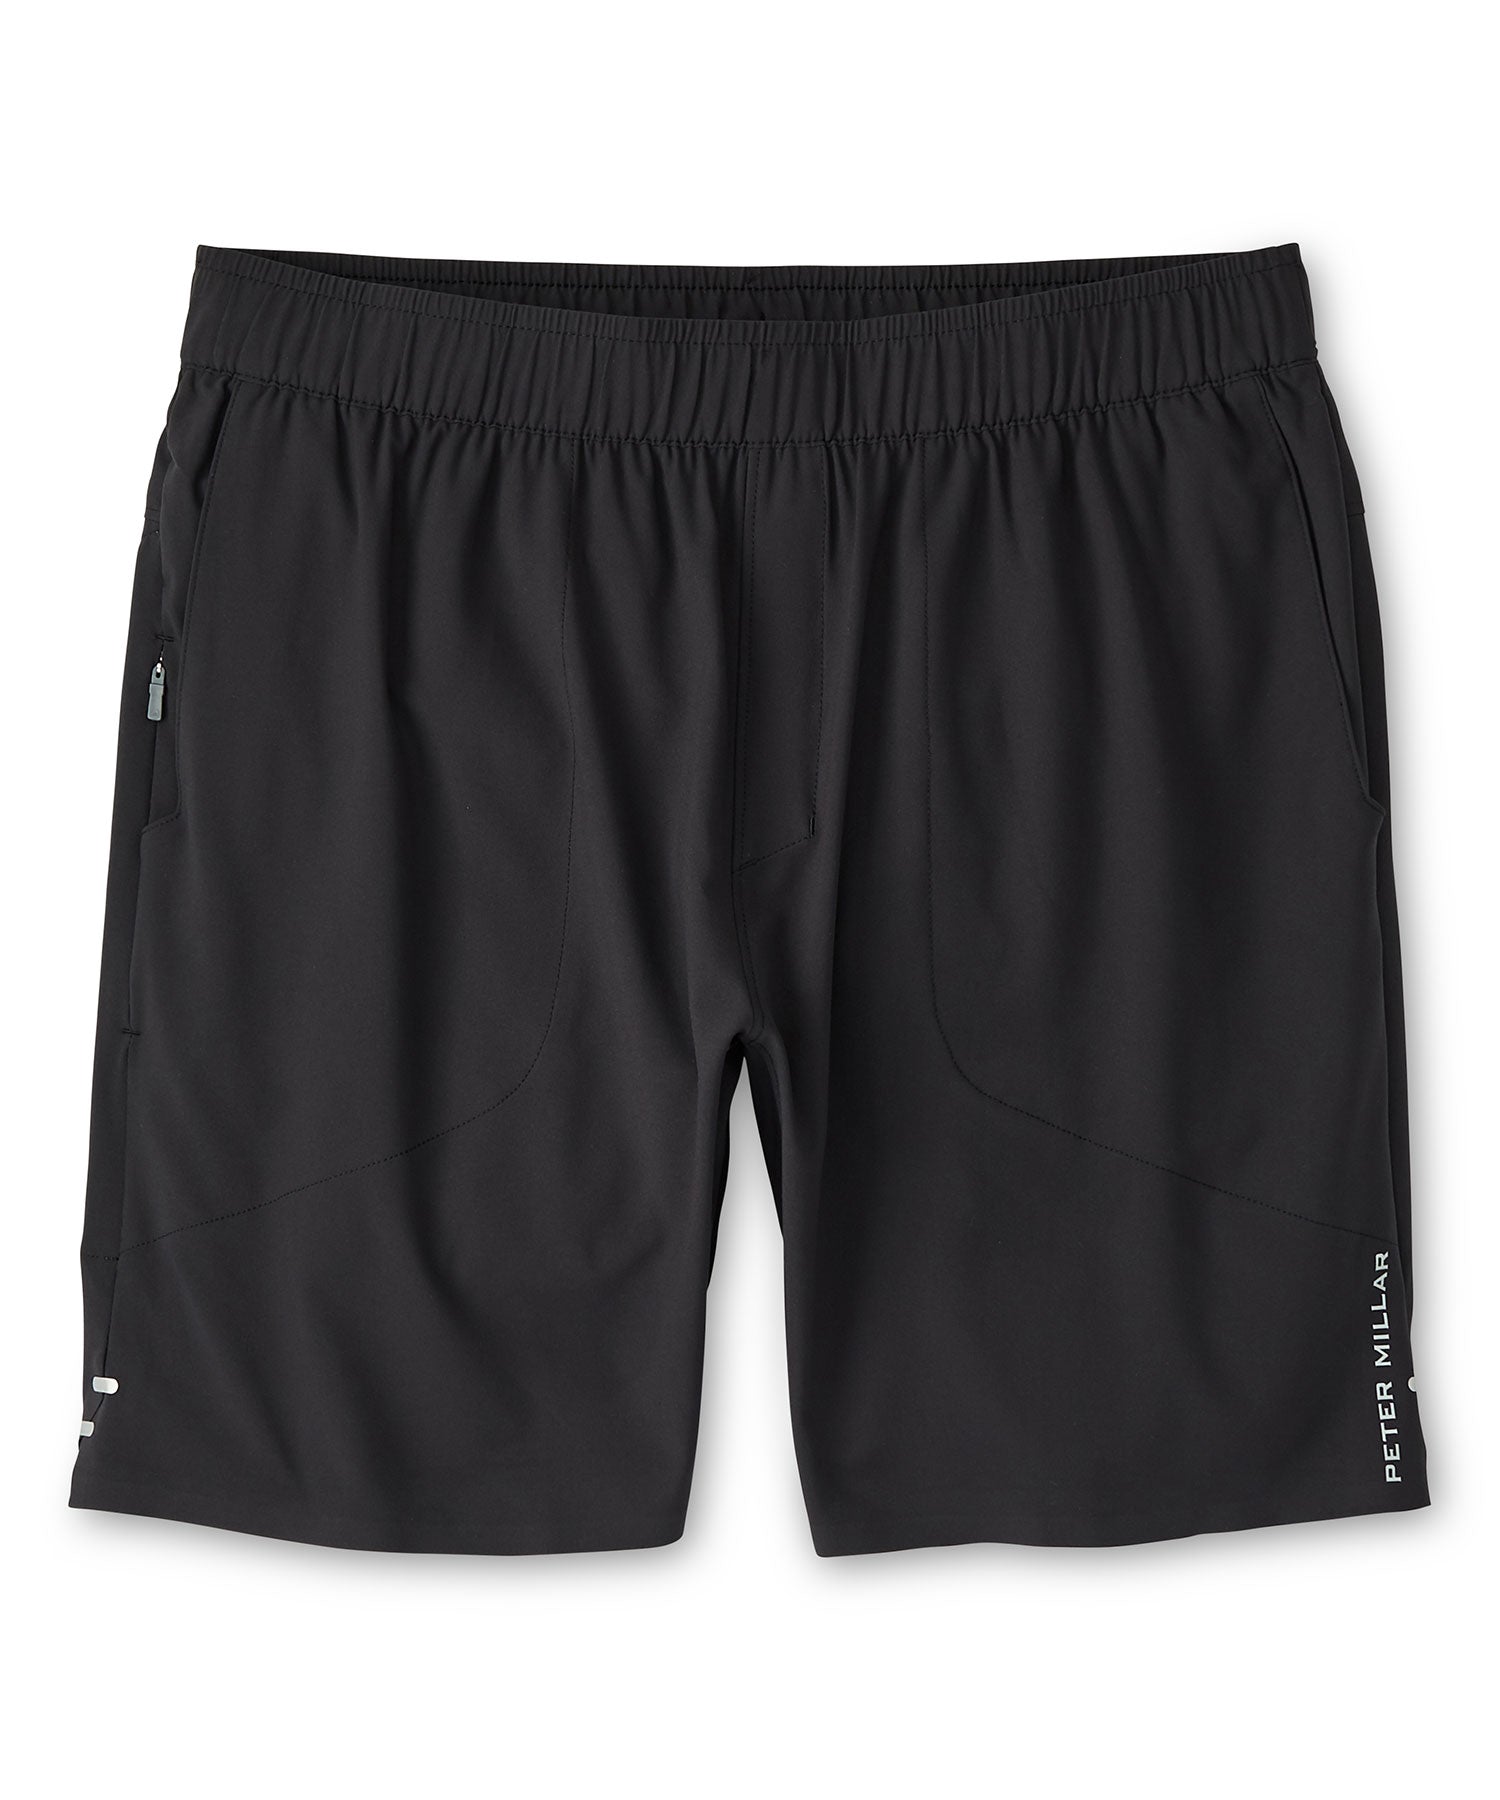 All Over Shorts: Performance Work Out Shorts